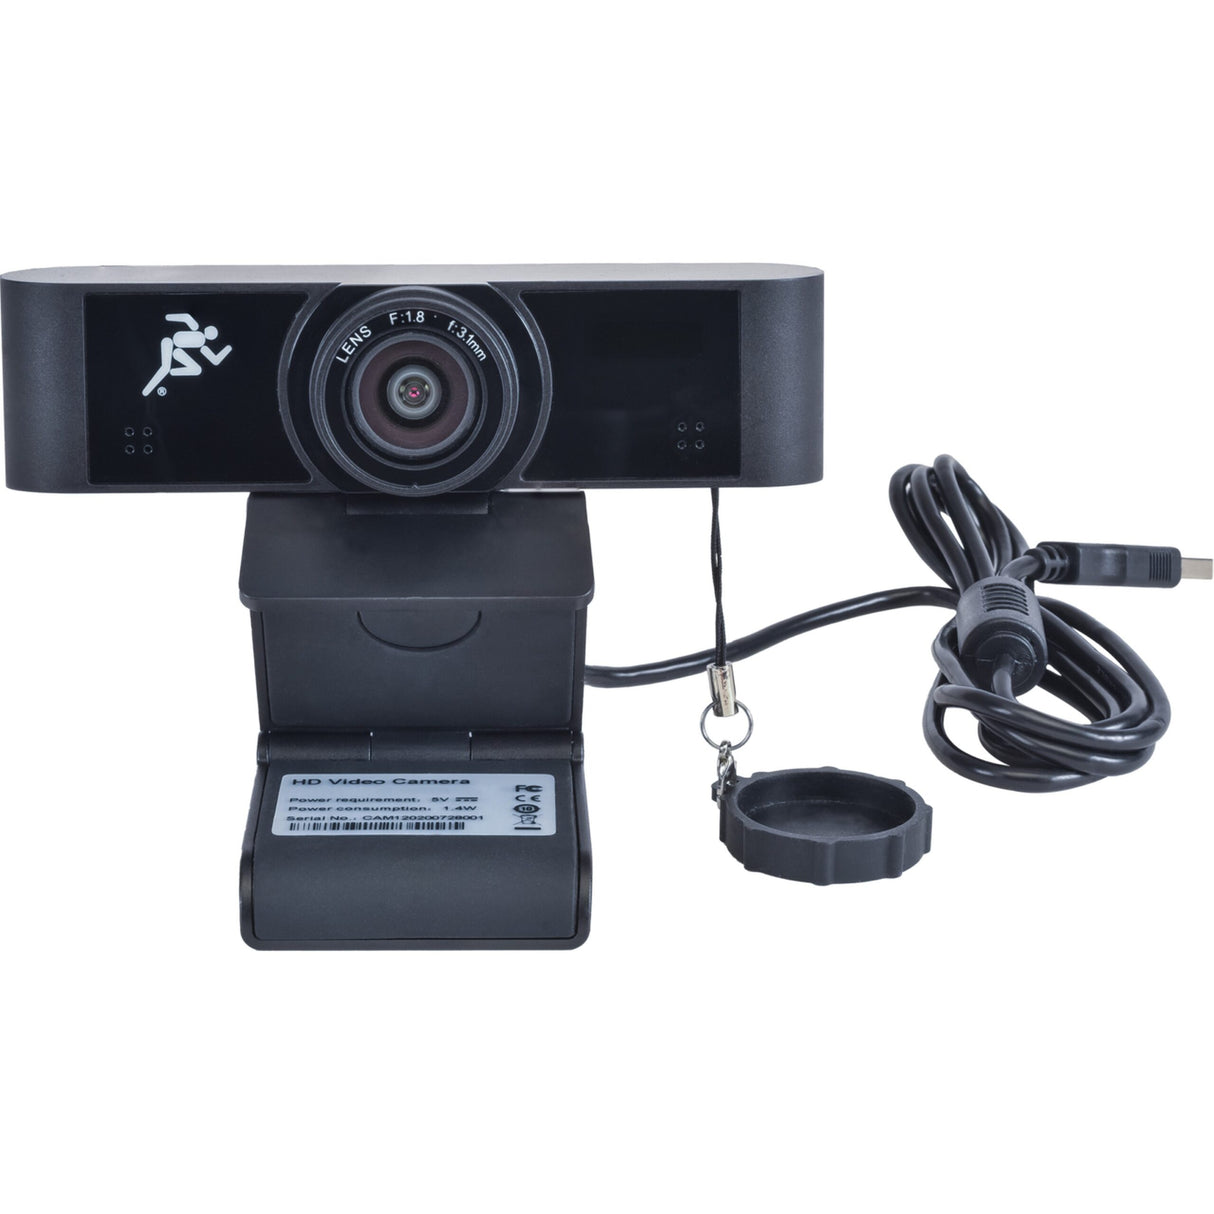 DigitaLinx USB 1080p WebCam with 120 Degree Ultra Wide-Angle View